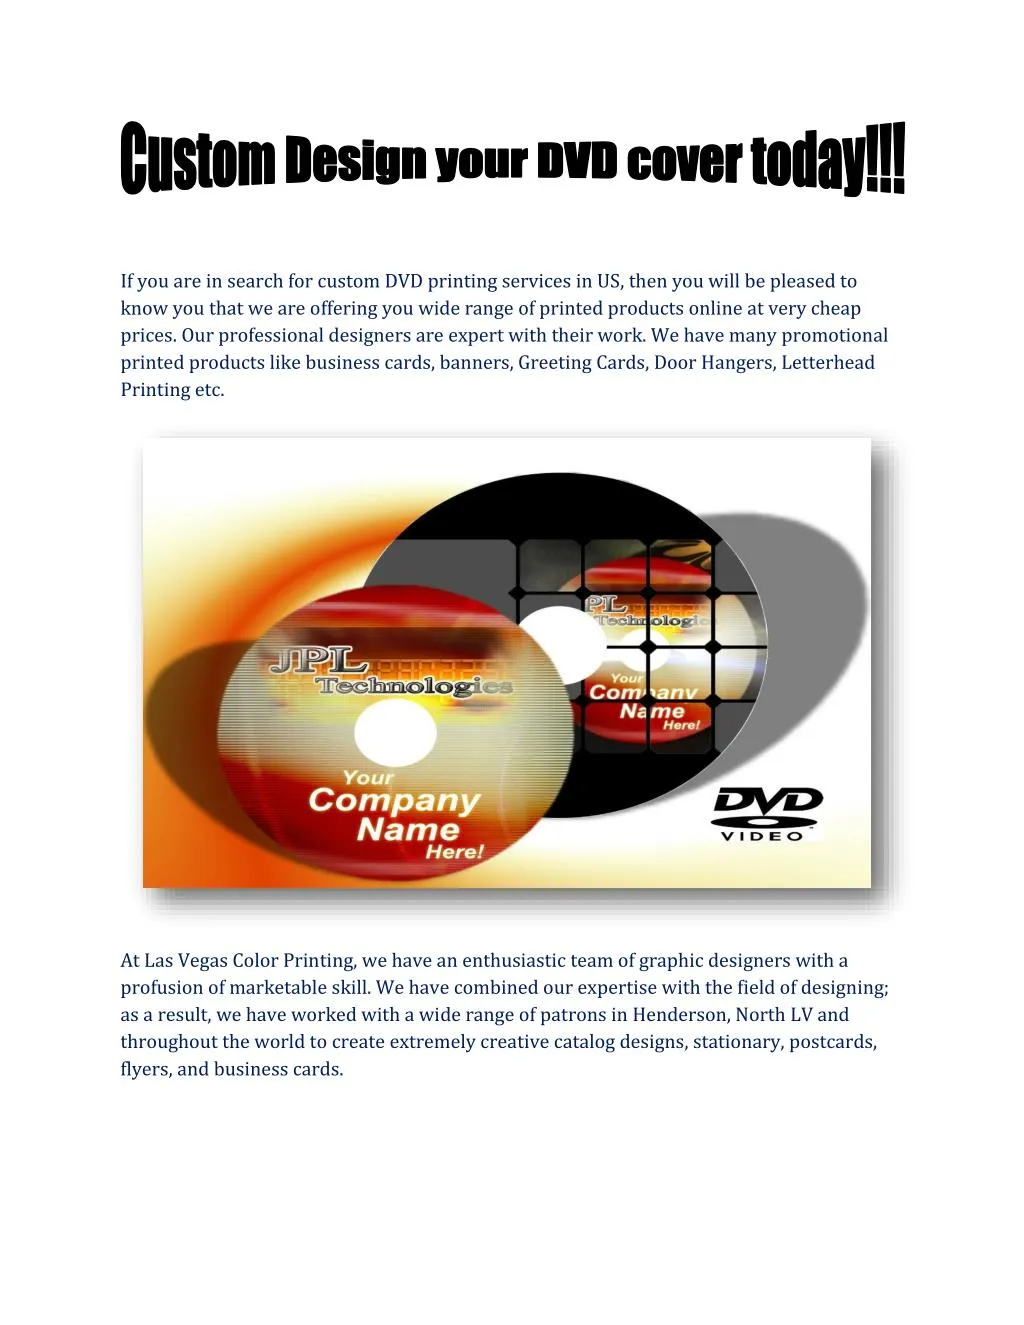 if you are in search for custom dvd printing